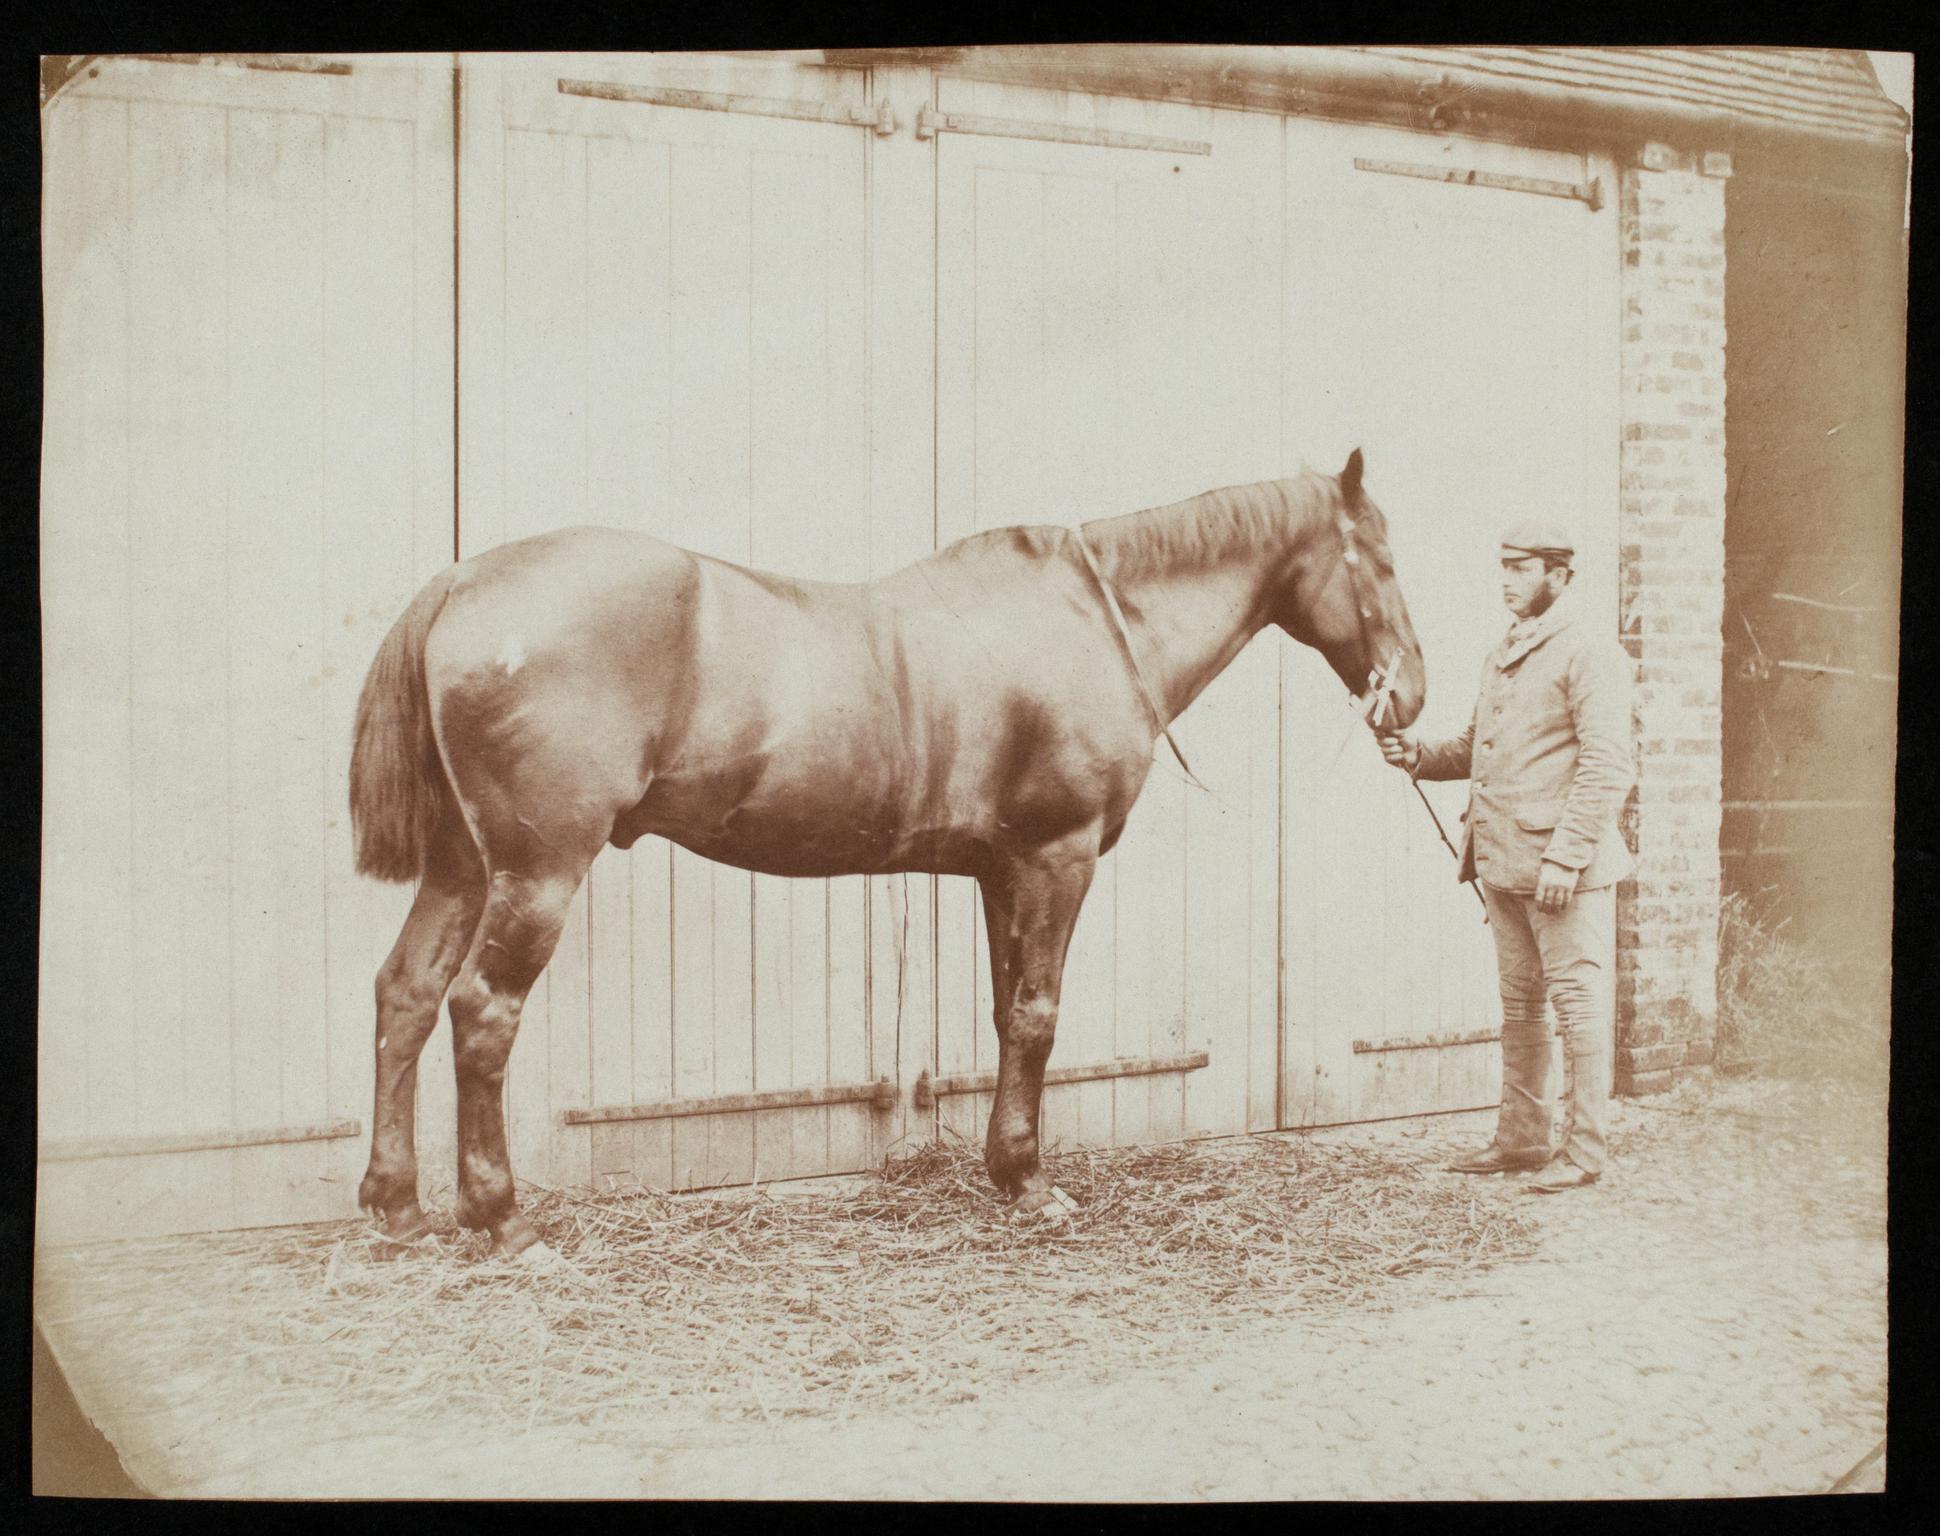 Groom with horse, photograph